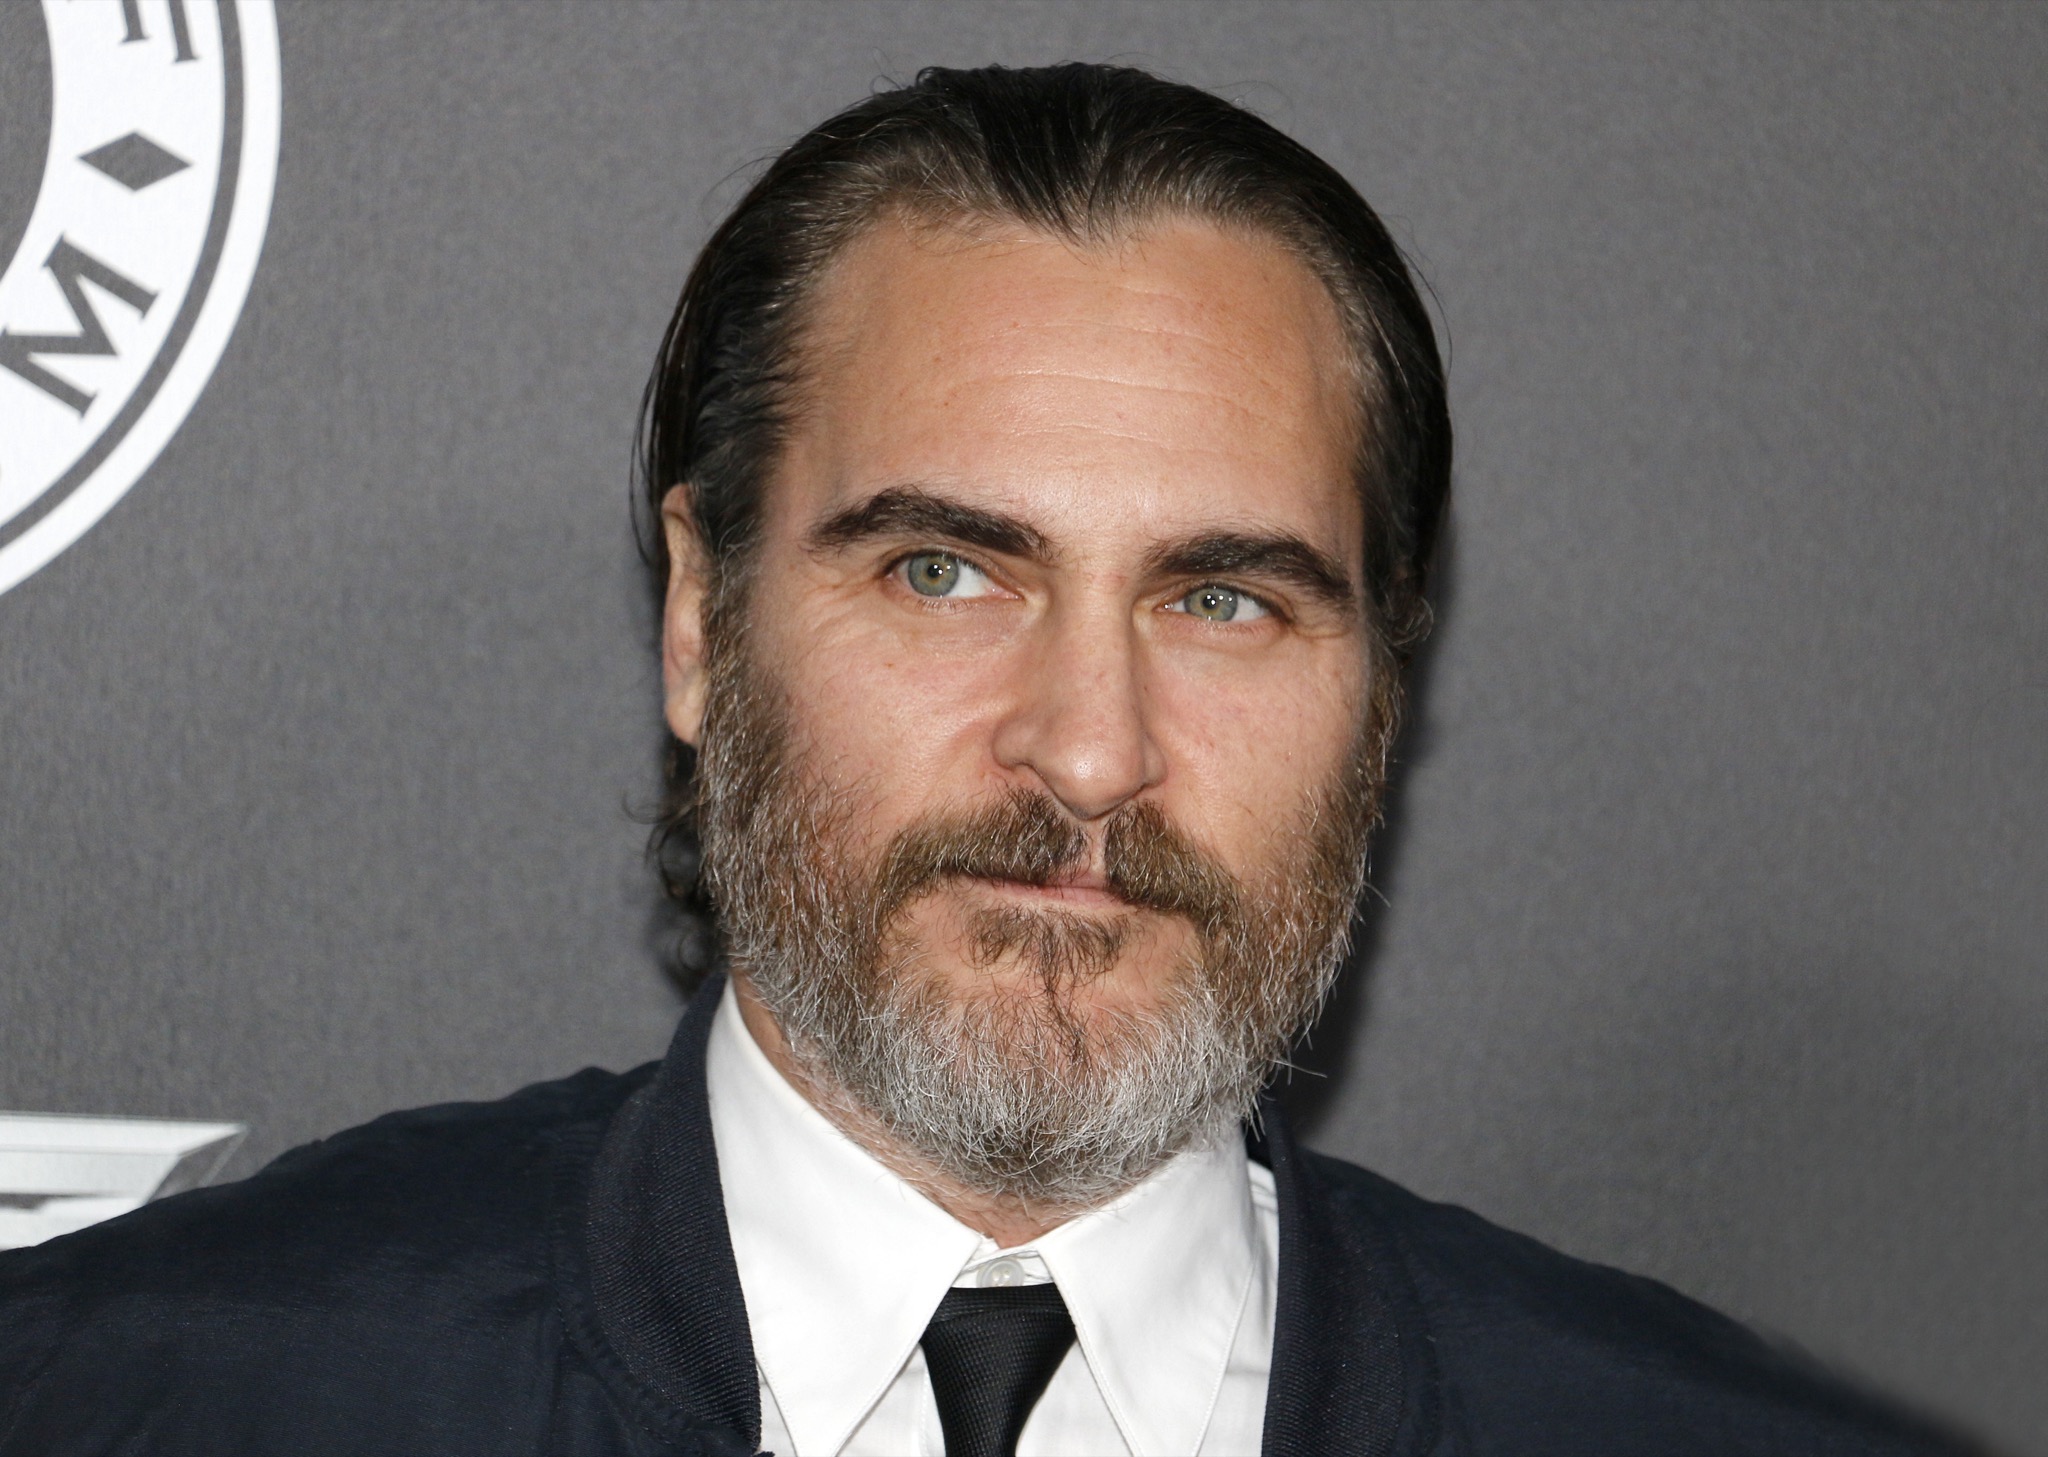 Joaquin Phoenix Net Worth In 2021 And All You Need To Know